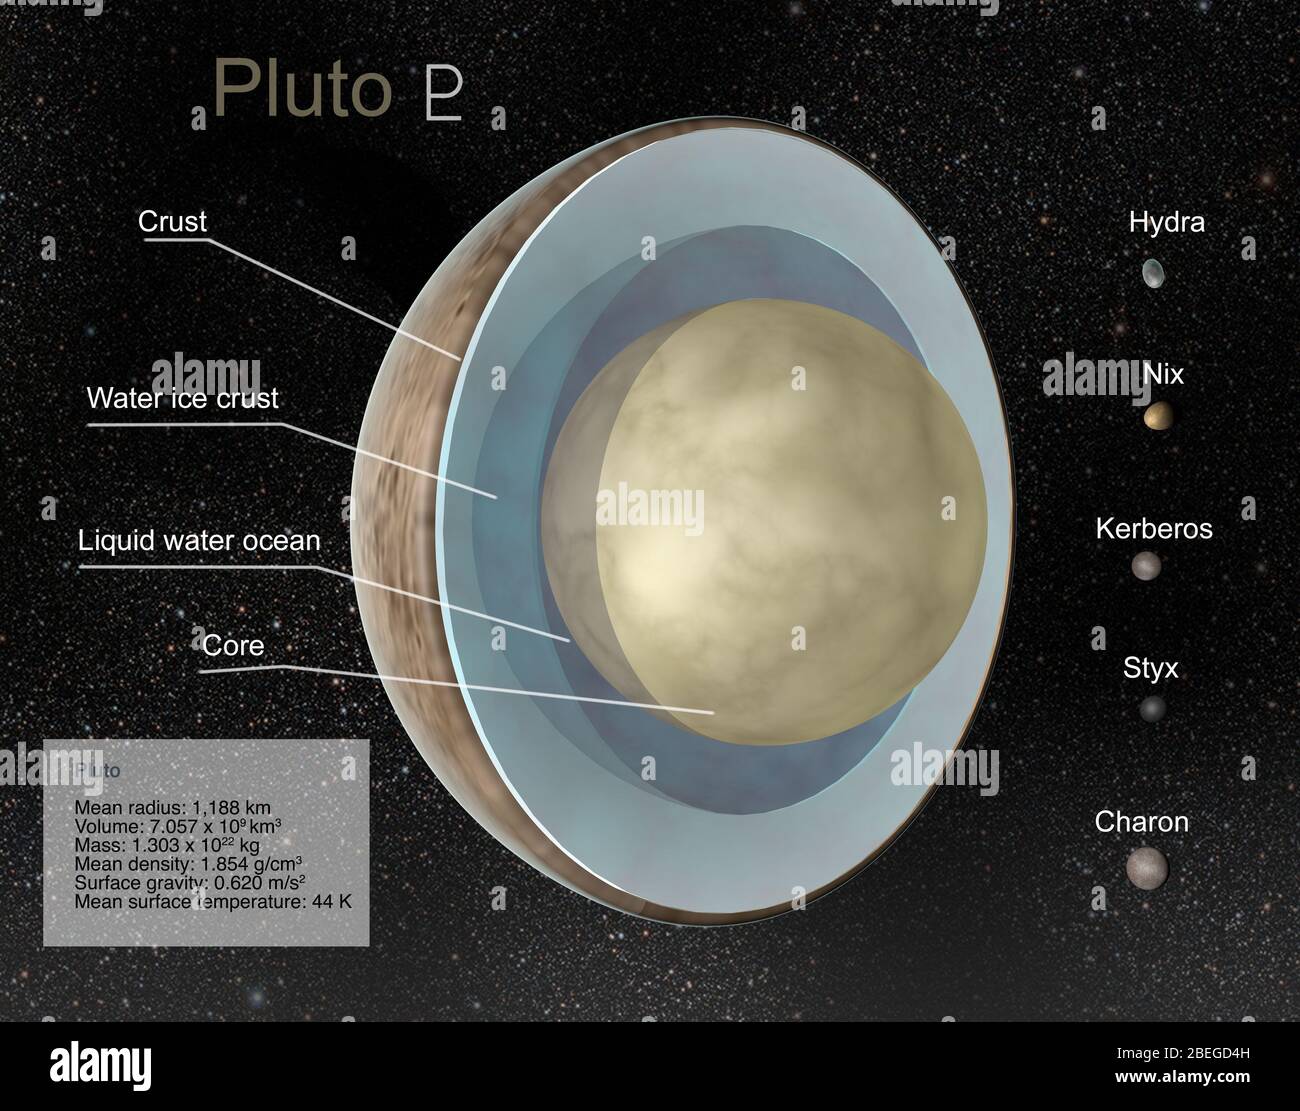 Illustration of Pluto in cutaway view showing the dwarf planet’s properties, as well as its five known moons: Charon, Styx, Nix, Kerberos and Hydra. Stock Photo